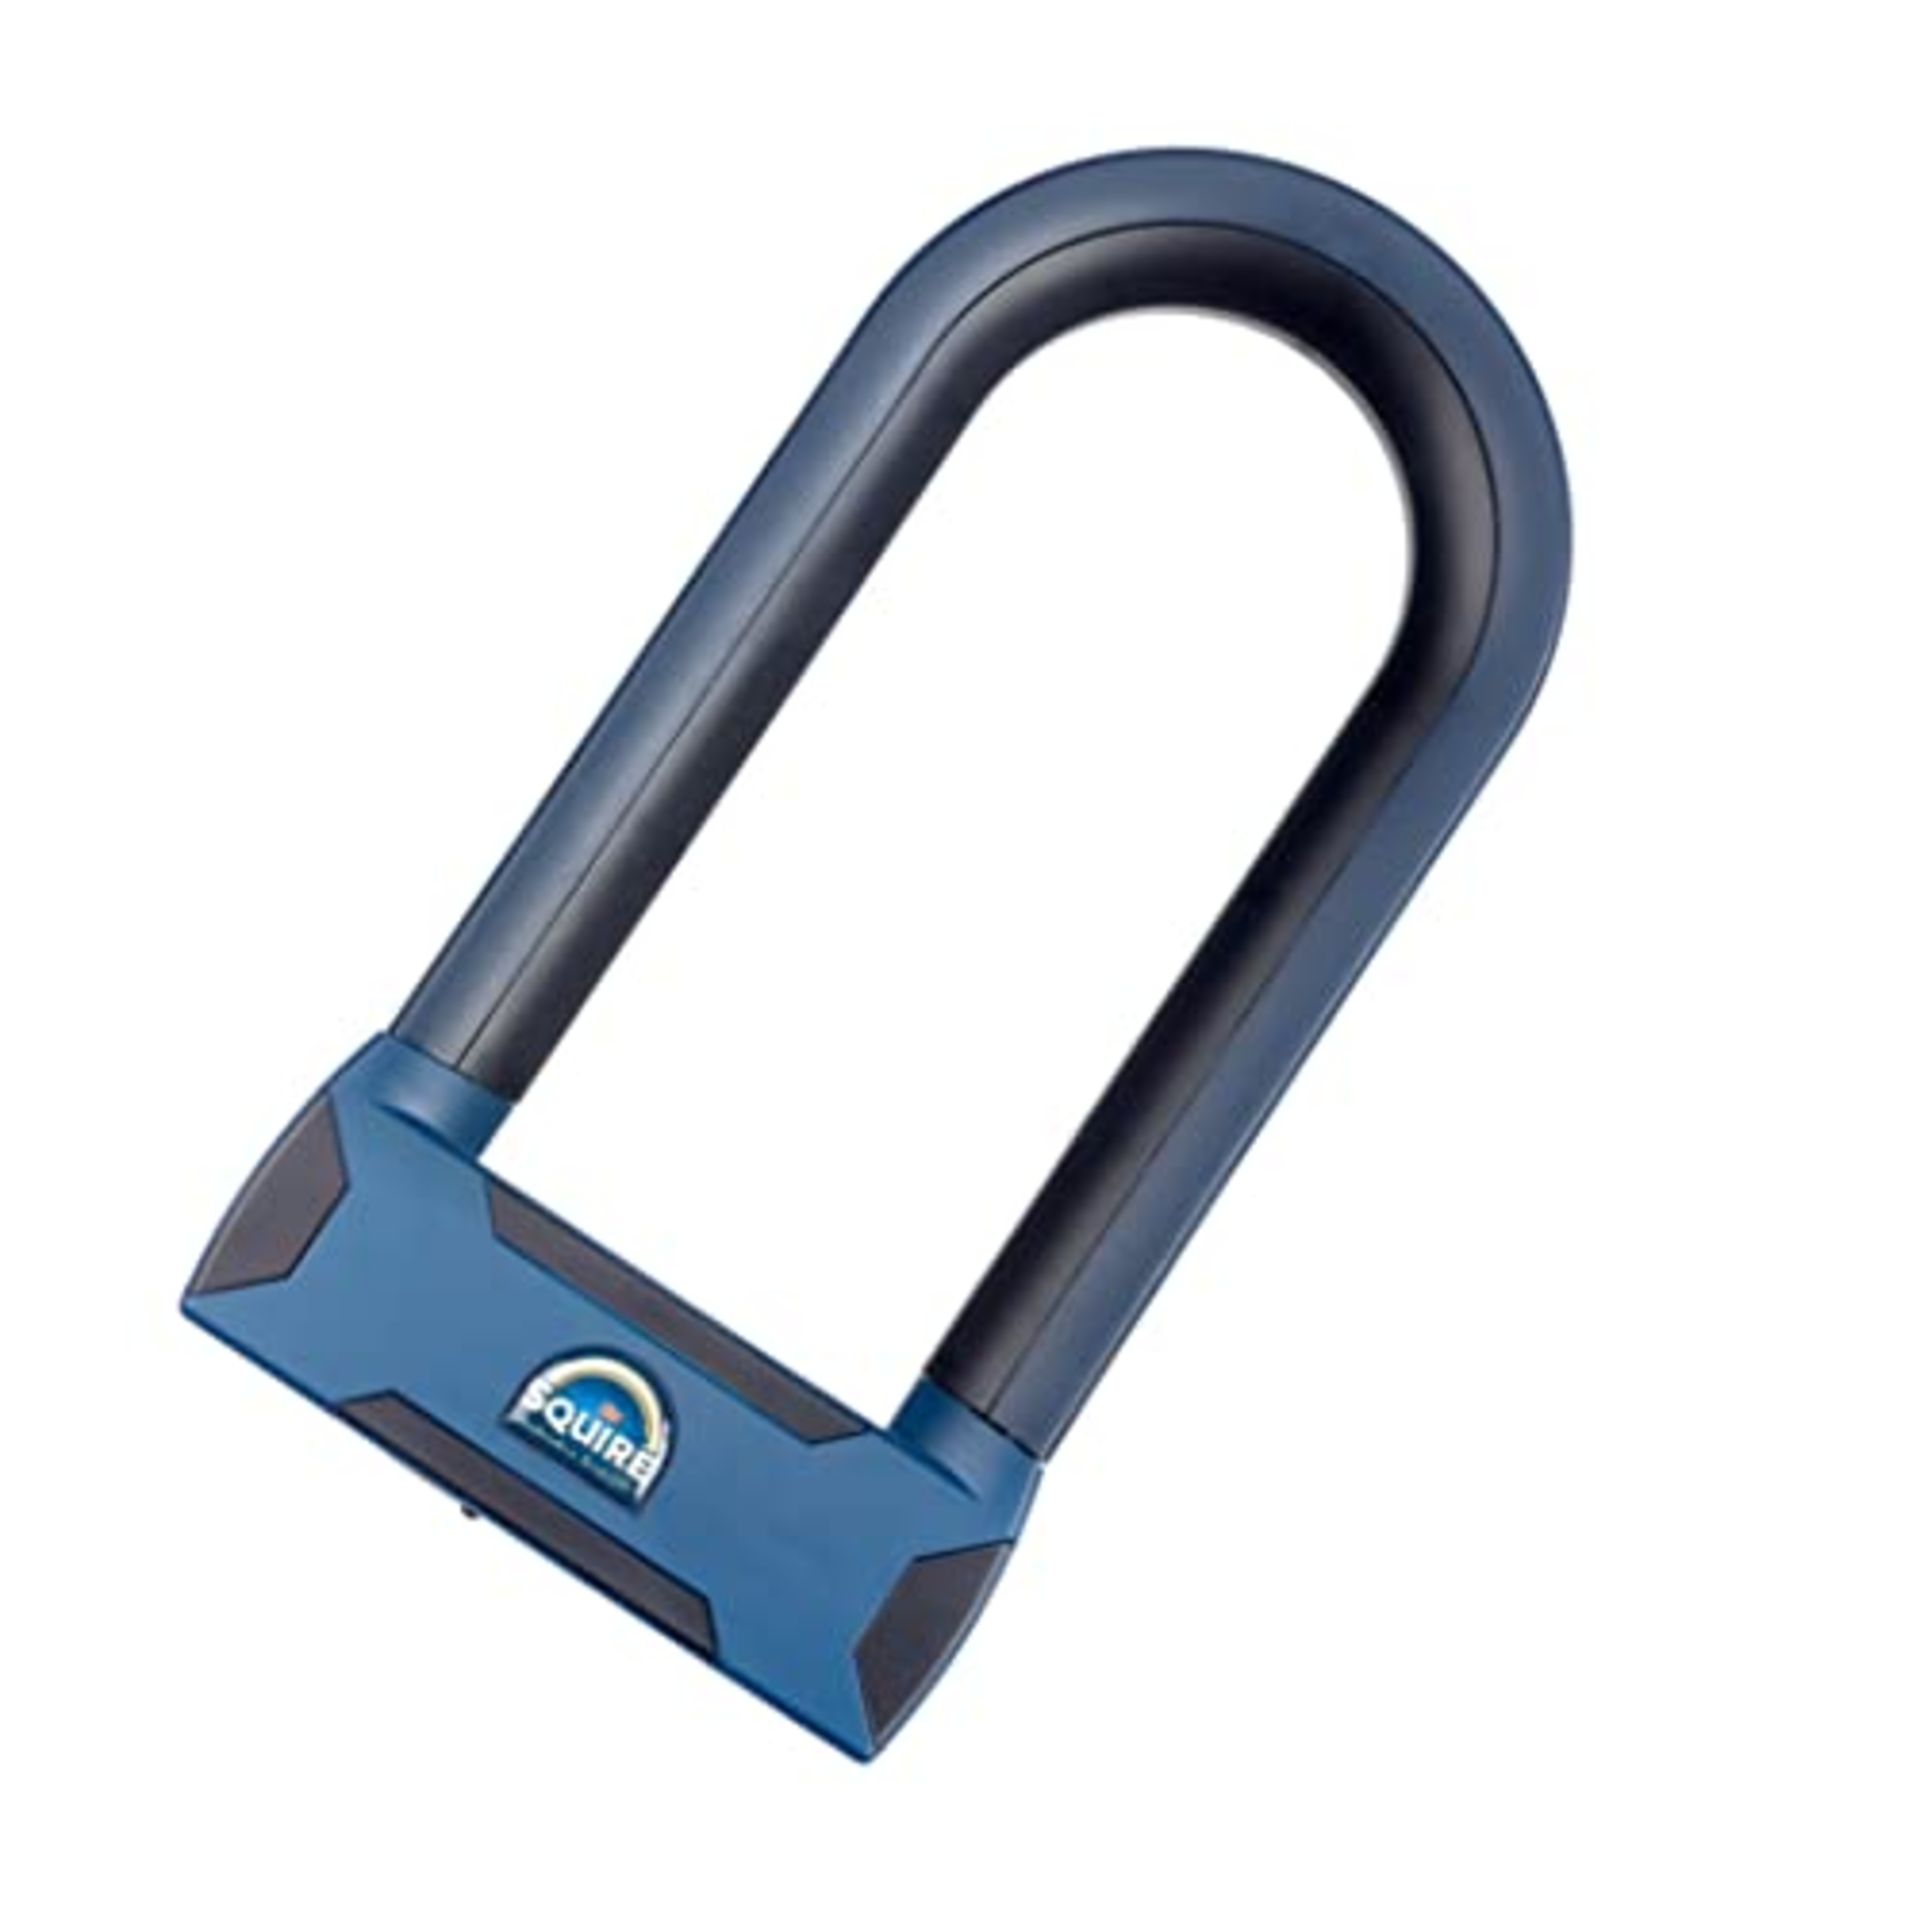 RRP £124.00 Squire Locks Stronghold D16/230 Keyed D-Lock: Hardened Boron Steel, 16mm Shackle, Sold